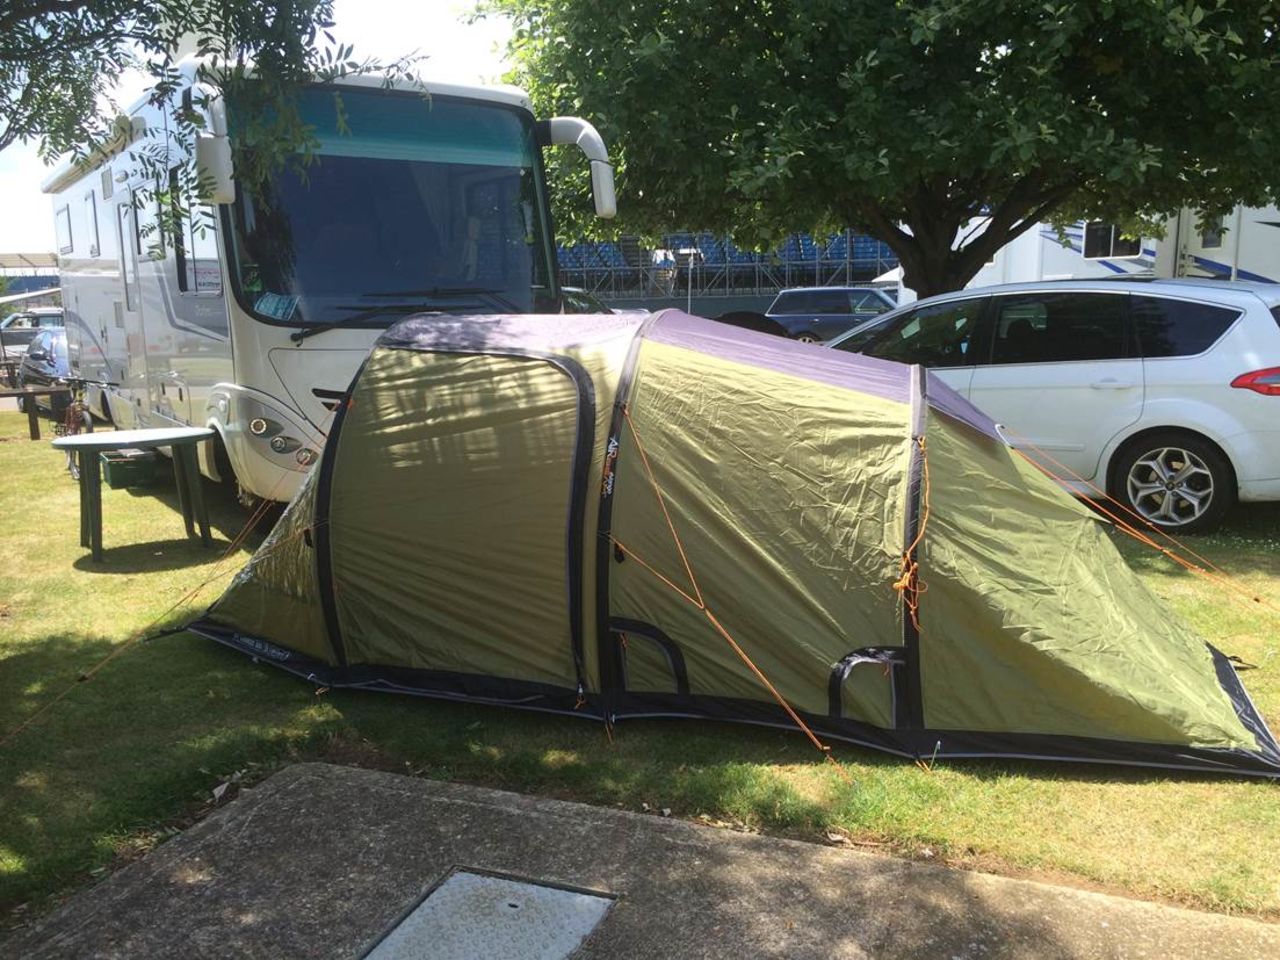 There are ex-team bosses too. This tent belongs to former Jordan team principal Eddie Jordan. "It all started because the traffic to Silverstone was horrific and to avoid all that it became fashionable to stay in tents," Jordan told CNN.